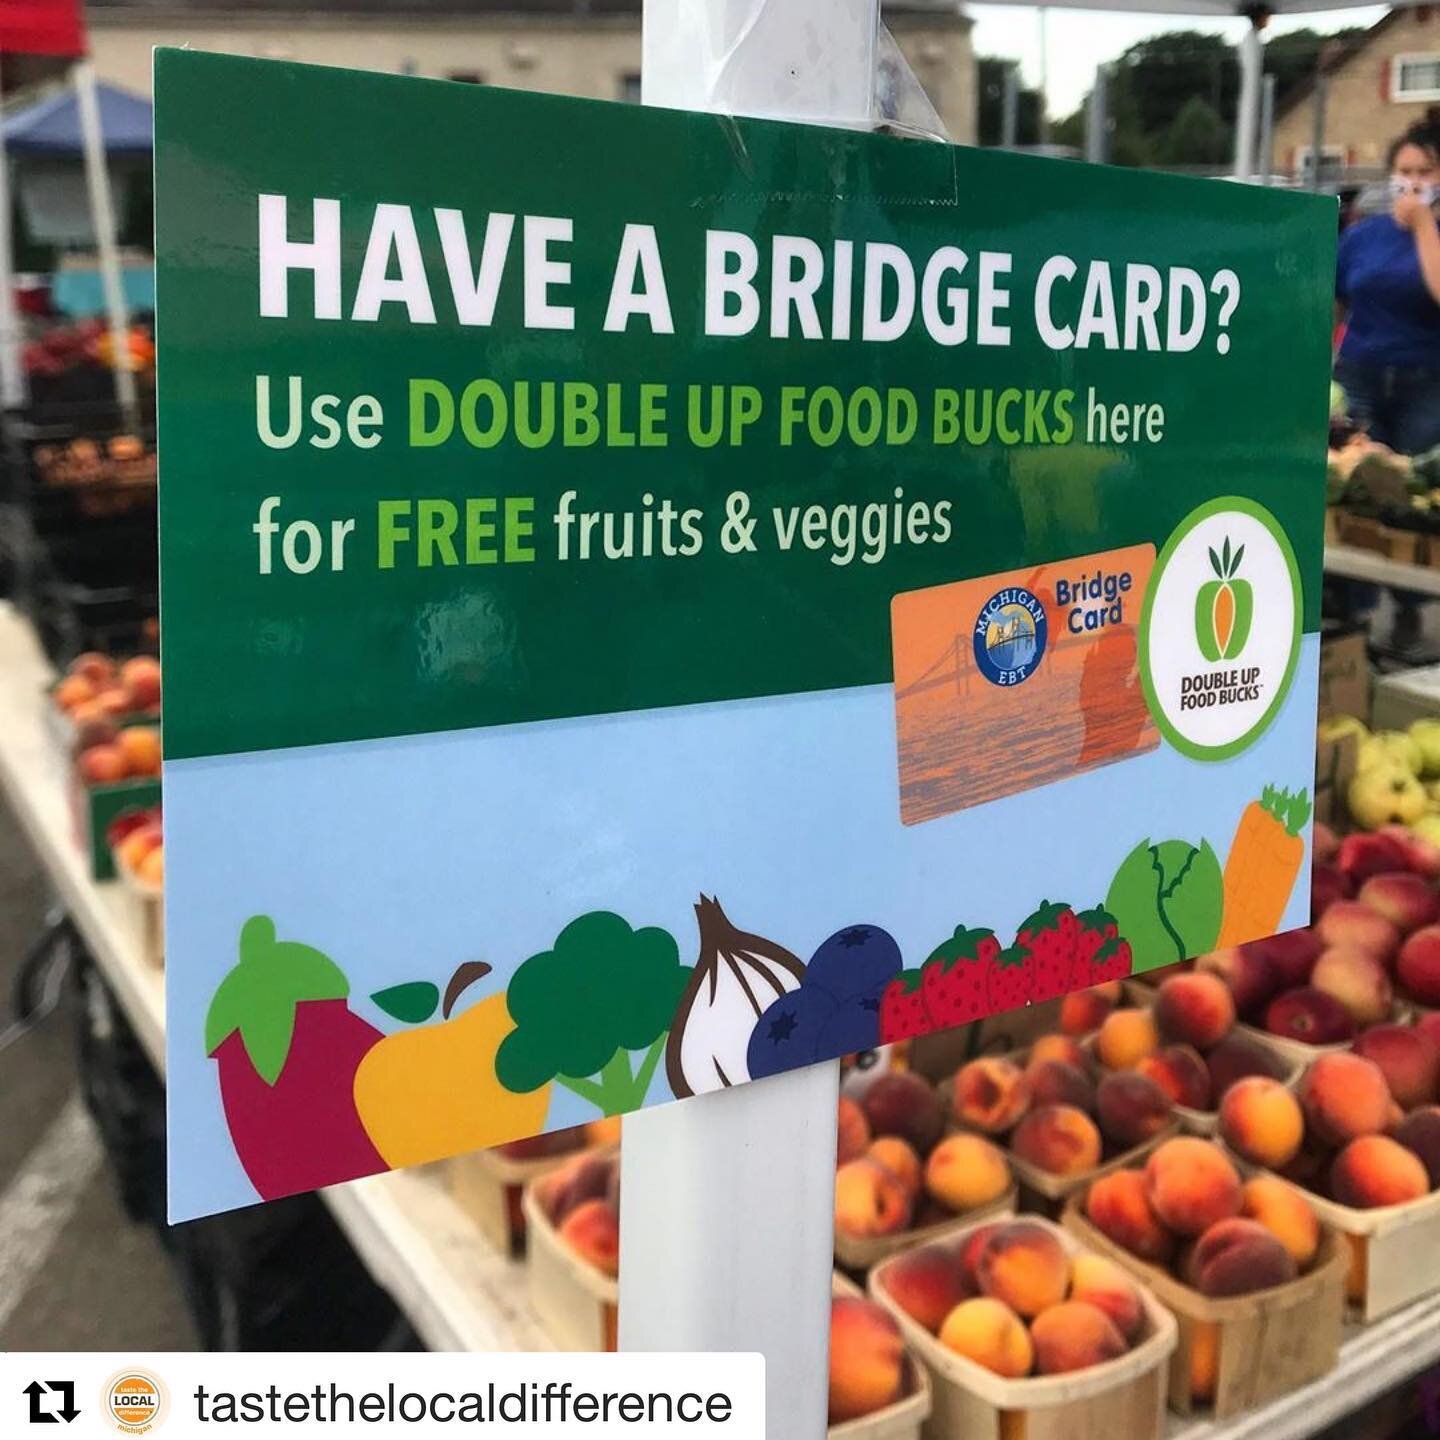 Was too busy checking out the sign I almost missed those peaches! Just one of the plentitude of things you can purchase with your double up food bucks at the farmers market. See below for more info on applying or utilizing your benefits!
#Repost @tas